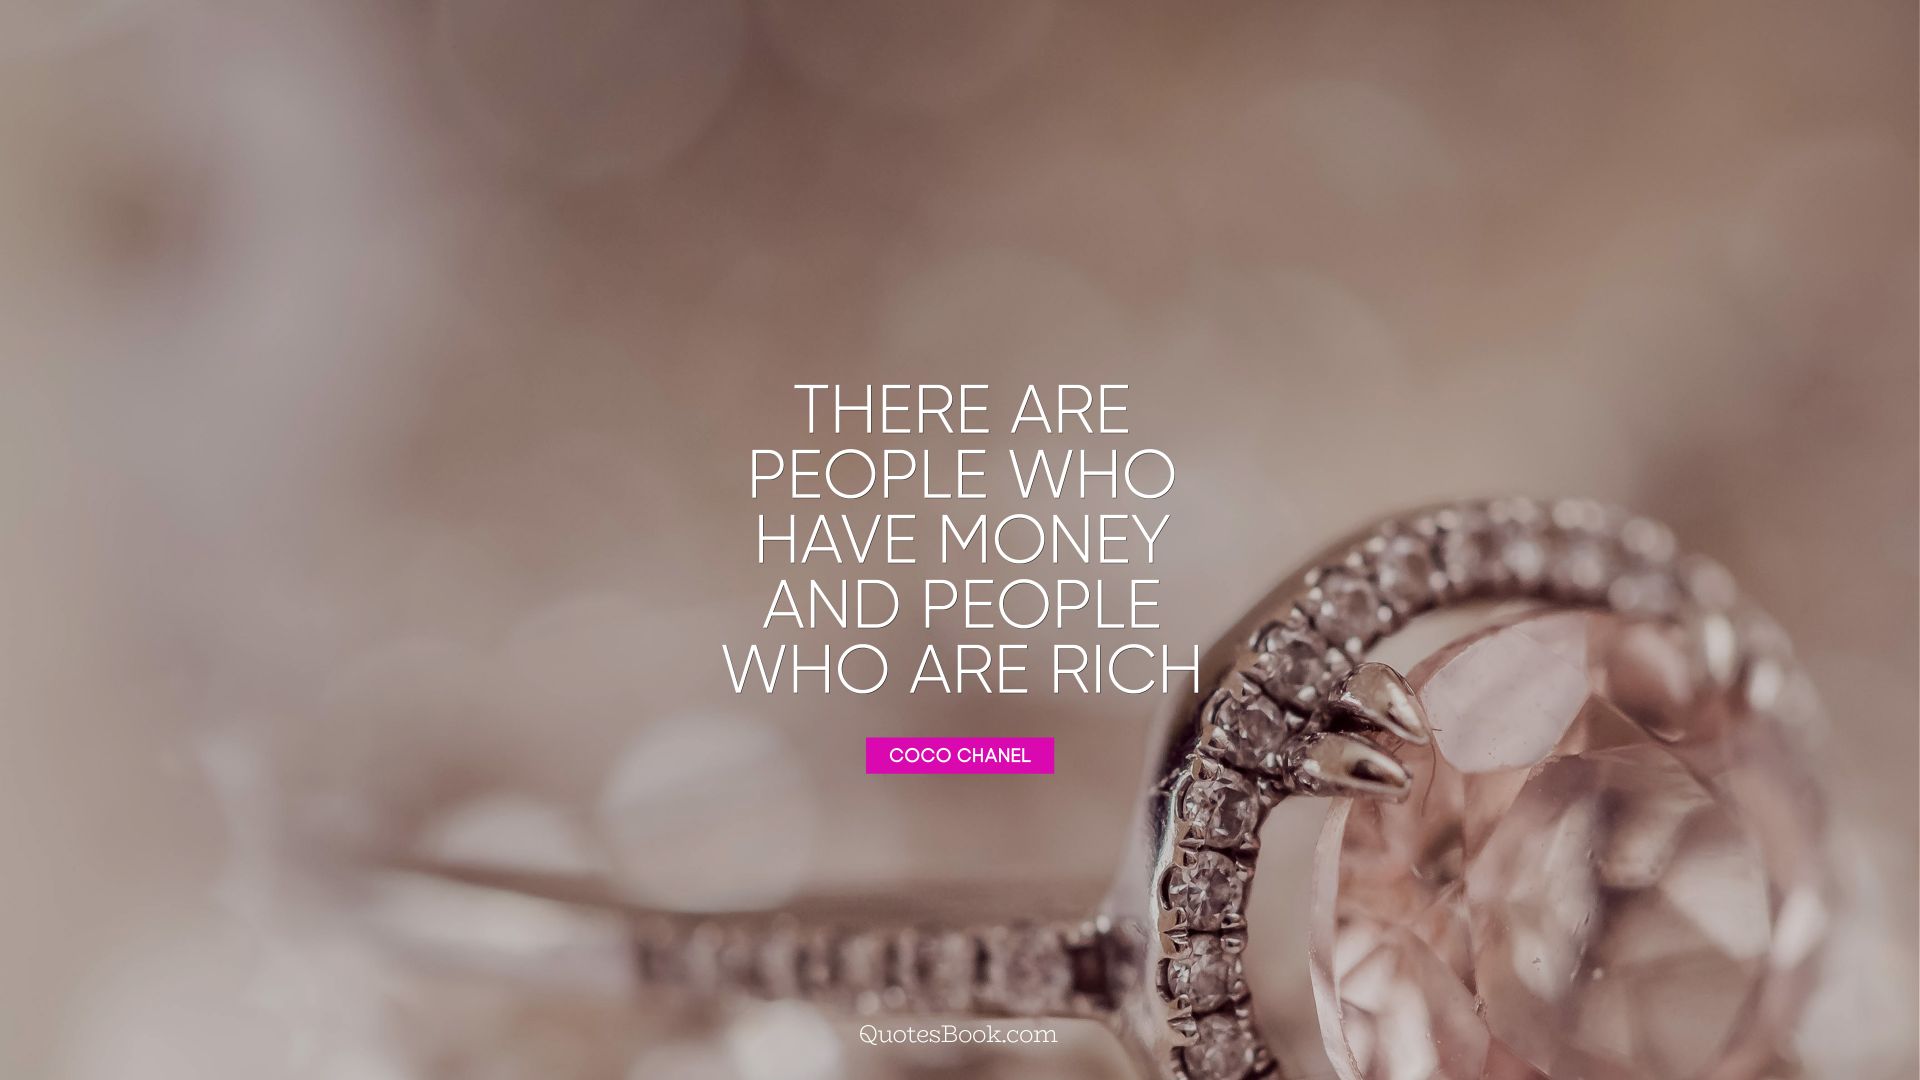 There are people who have money and people who are rich. - Quote by Coco Chanel